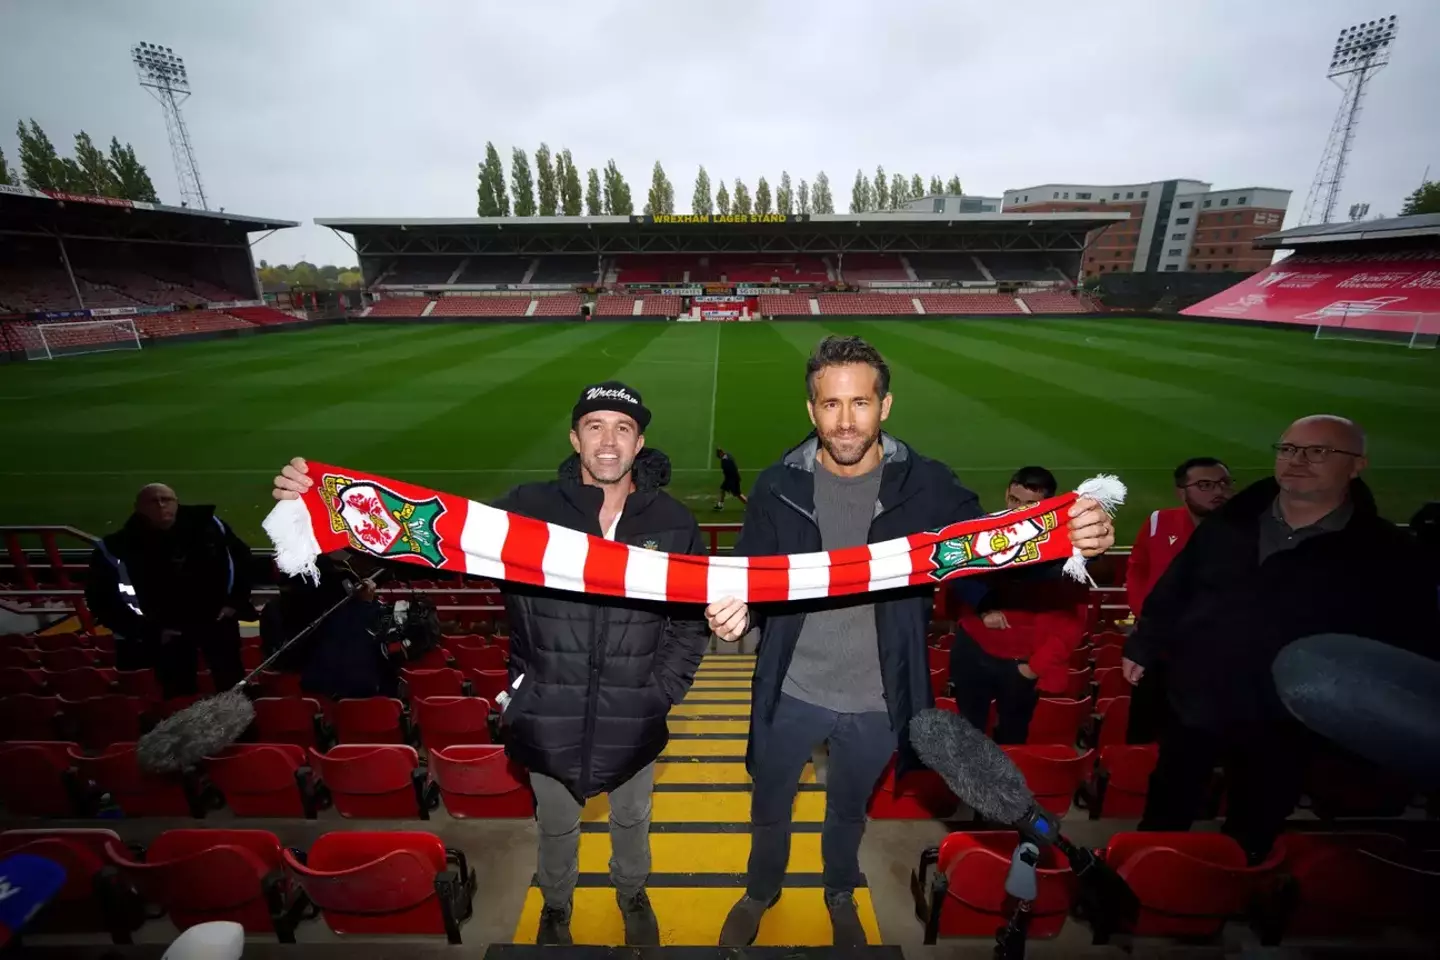 Wrexham FC is set to receive a hefty £17 million windfall payment from the government ahead of the team's historical Football League return.